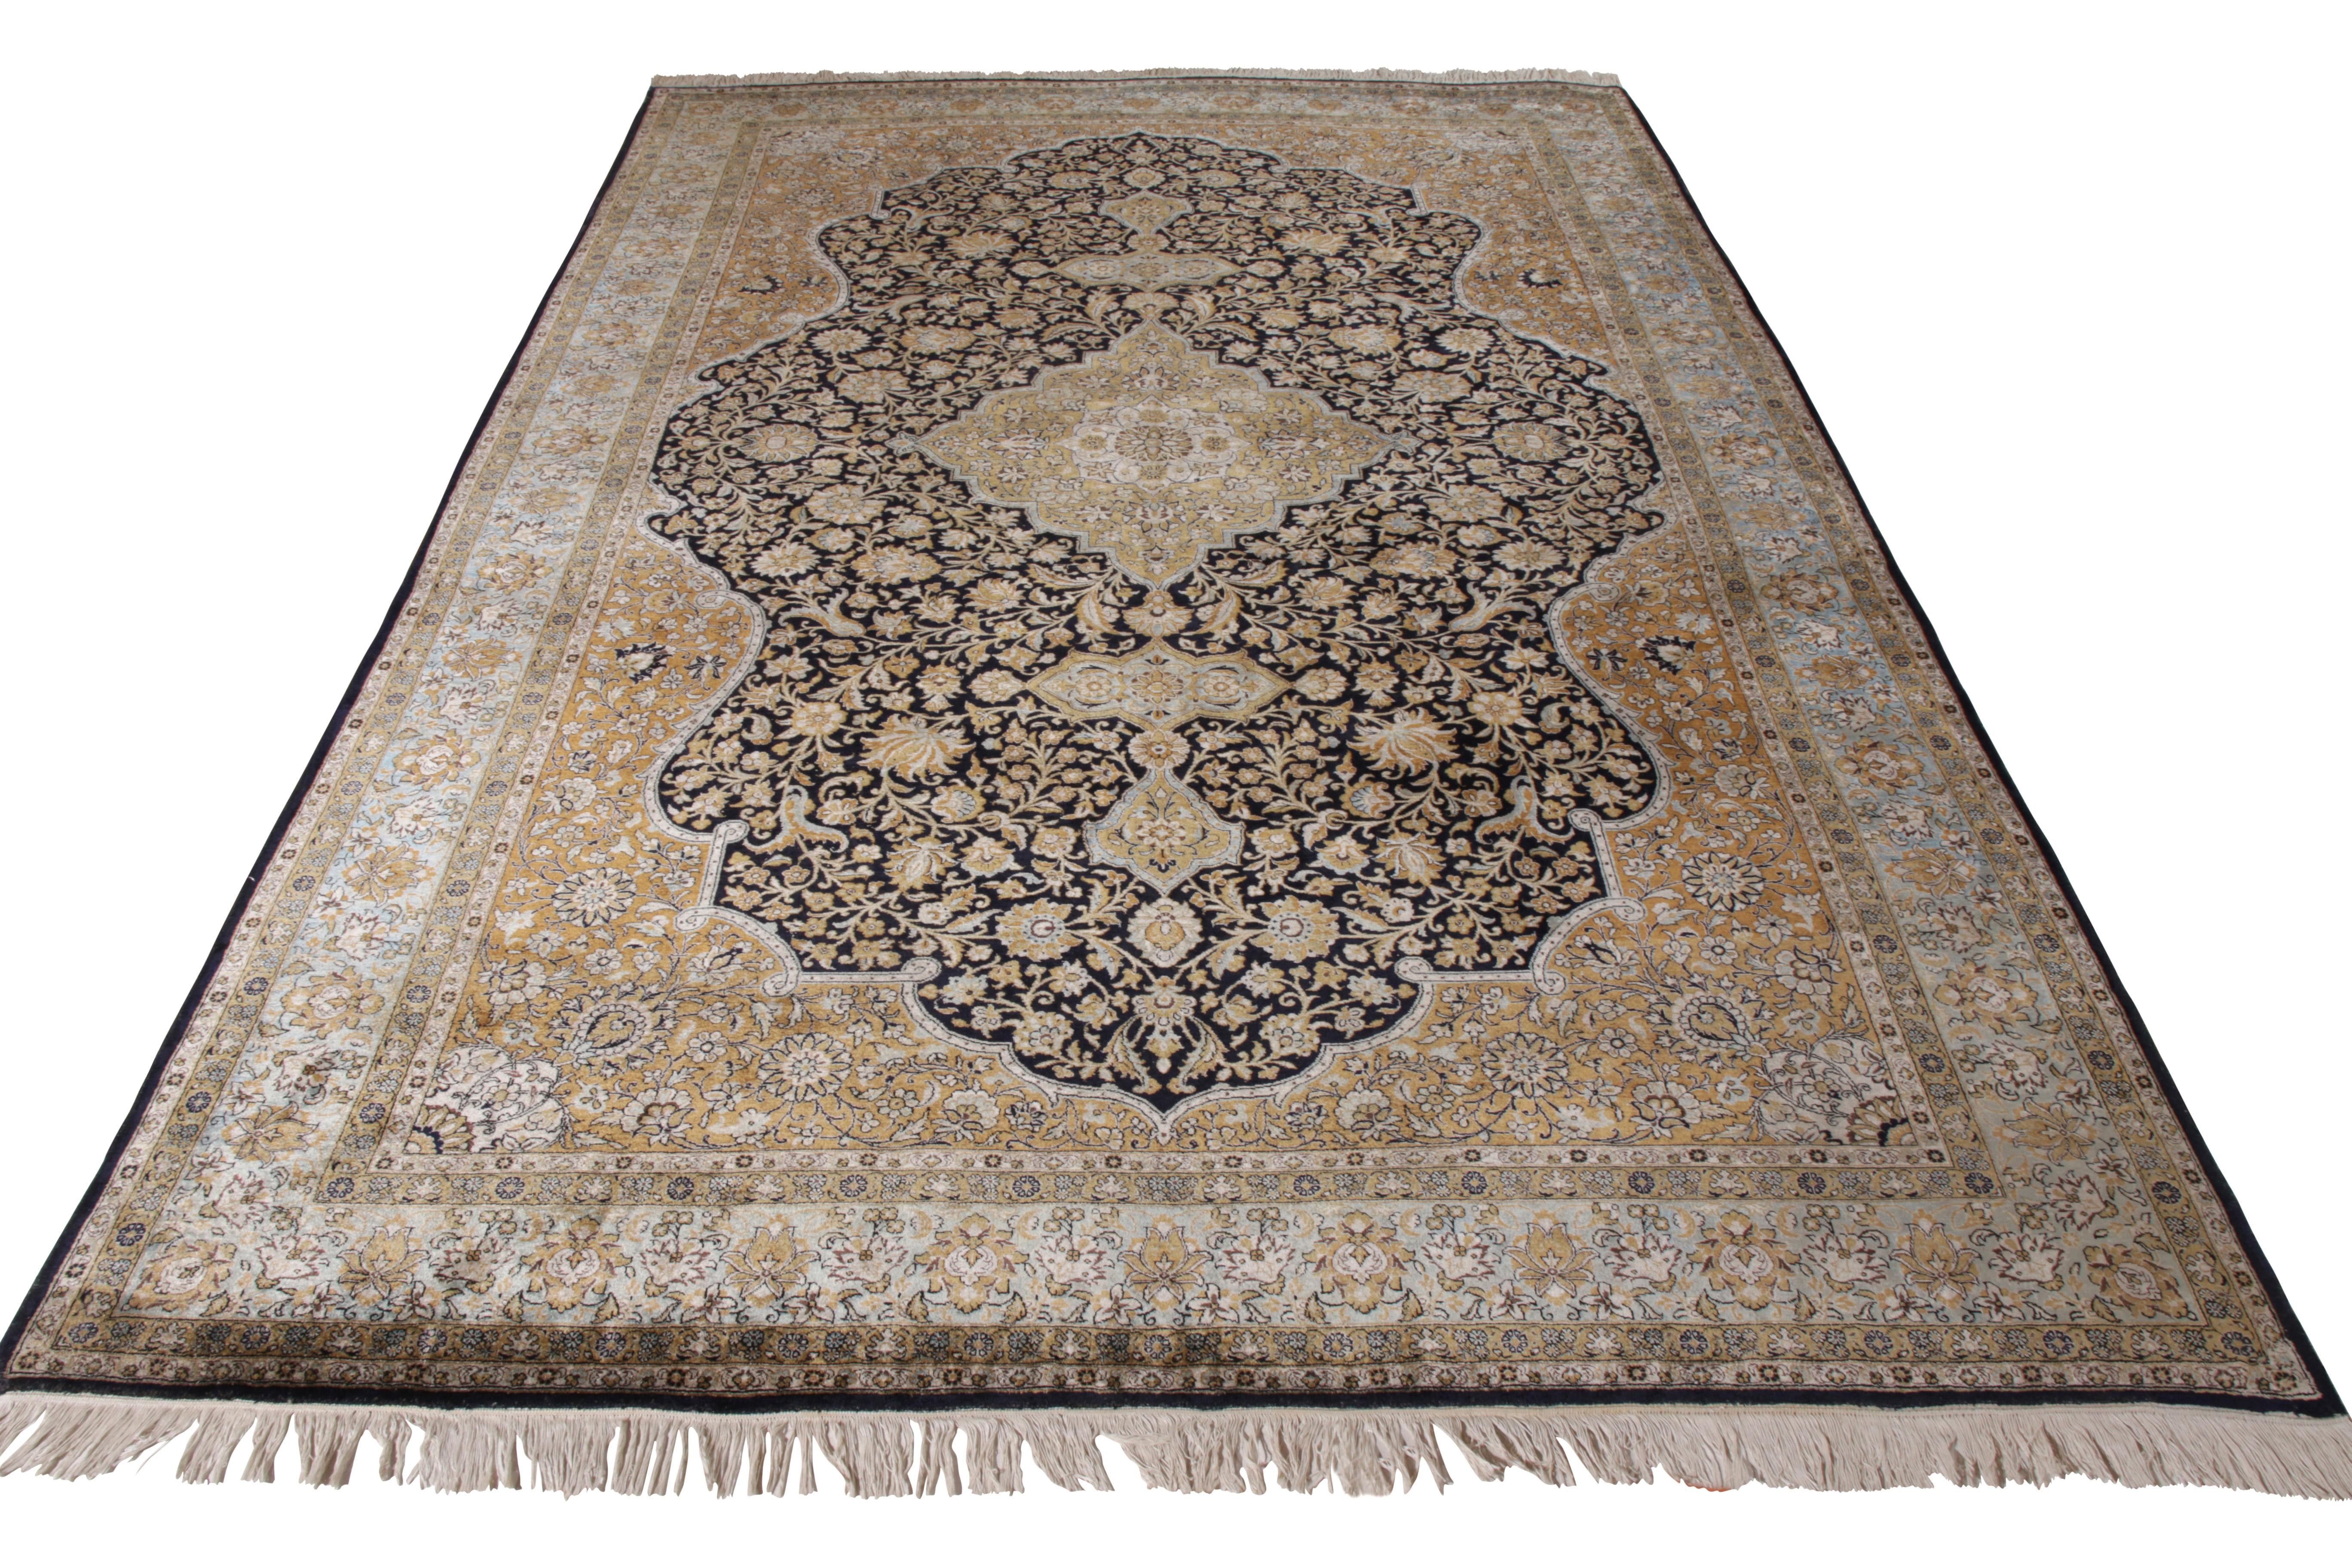 A 7x11 vintage Qum rug in regal medallion style, enjoying hues of beige-brown atop black with comfortable blue accents. Hand knotted in silk circa 1910-1920 from one of the most venerated mid-century Persian rugs among handmade Oriental rugs. 

On